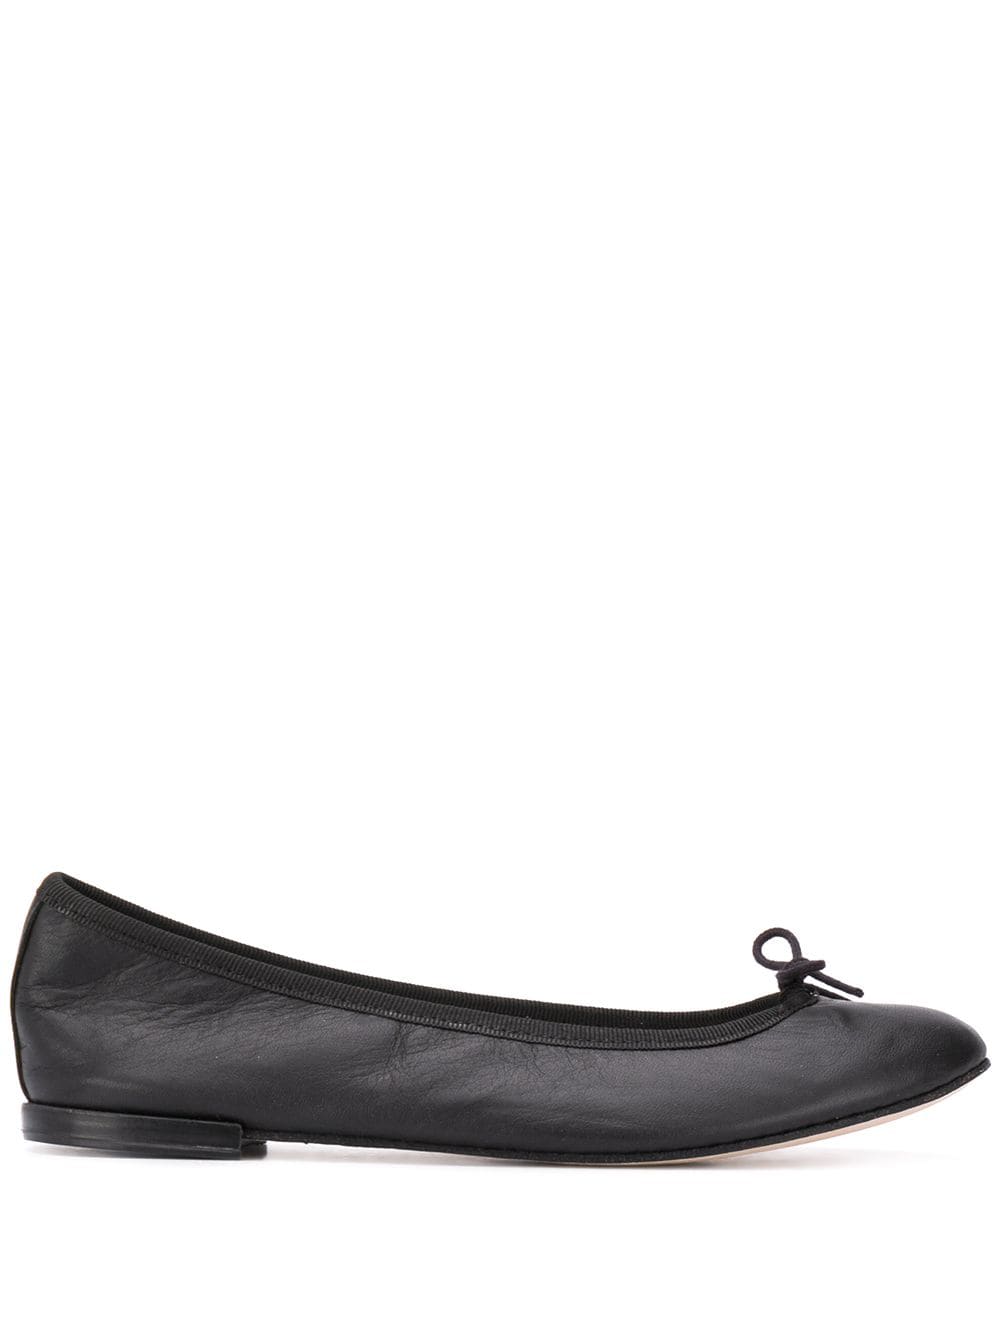 Repetto bow detail ballerina shoes Black